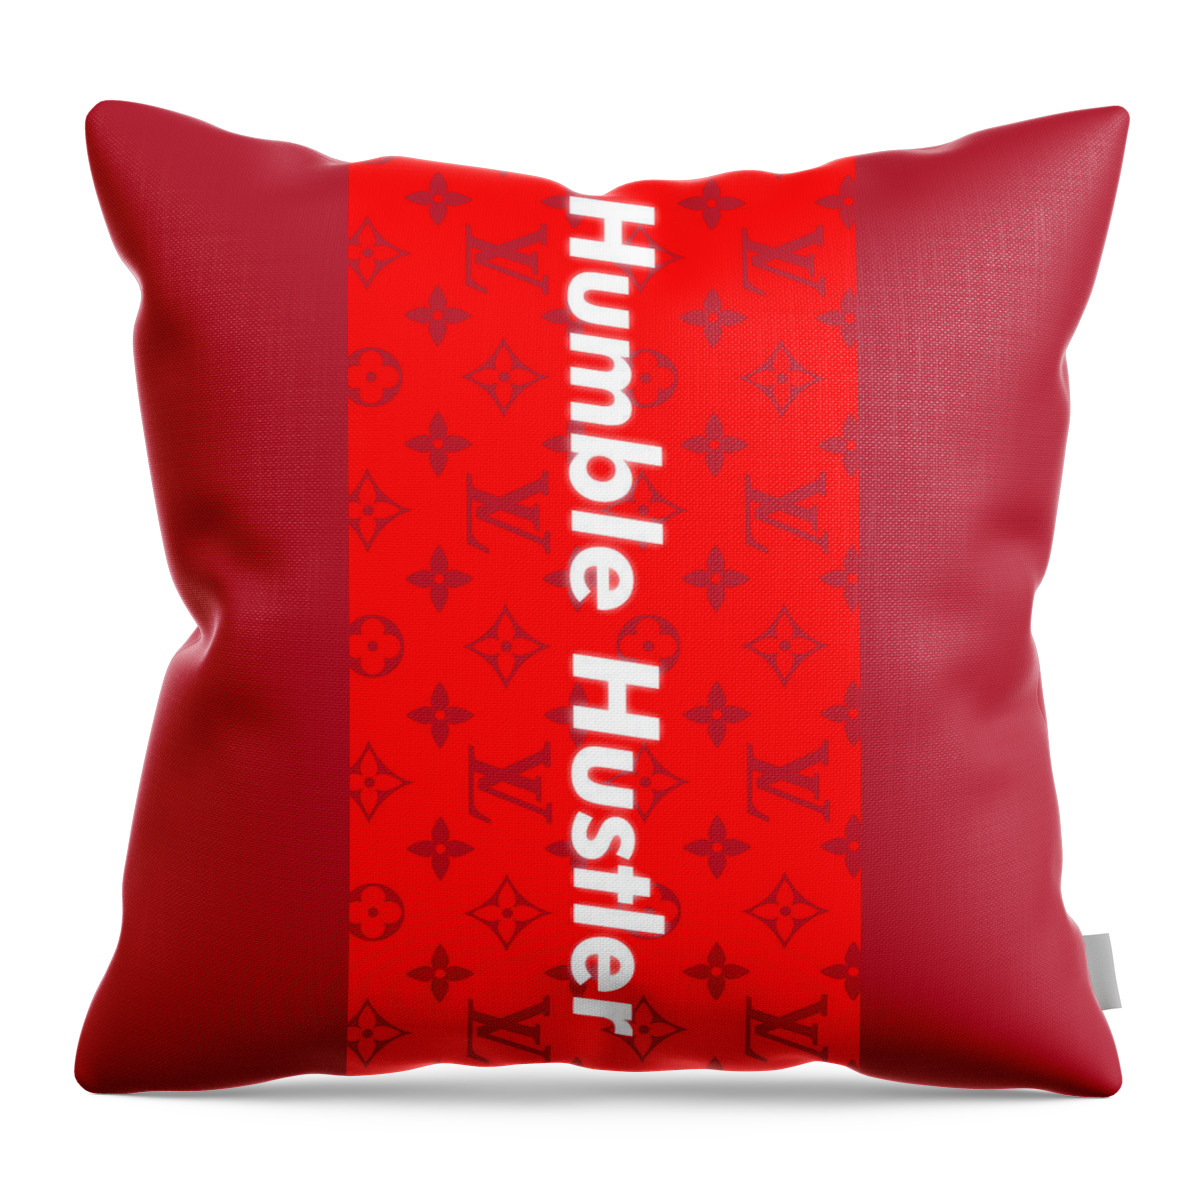 Humble Hustler Throw Pillow featuring the digital art Humble Hustler red by Canvas Cultures